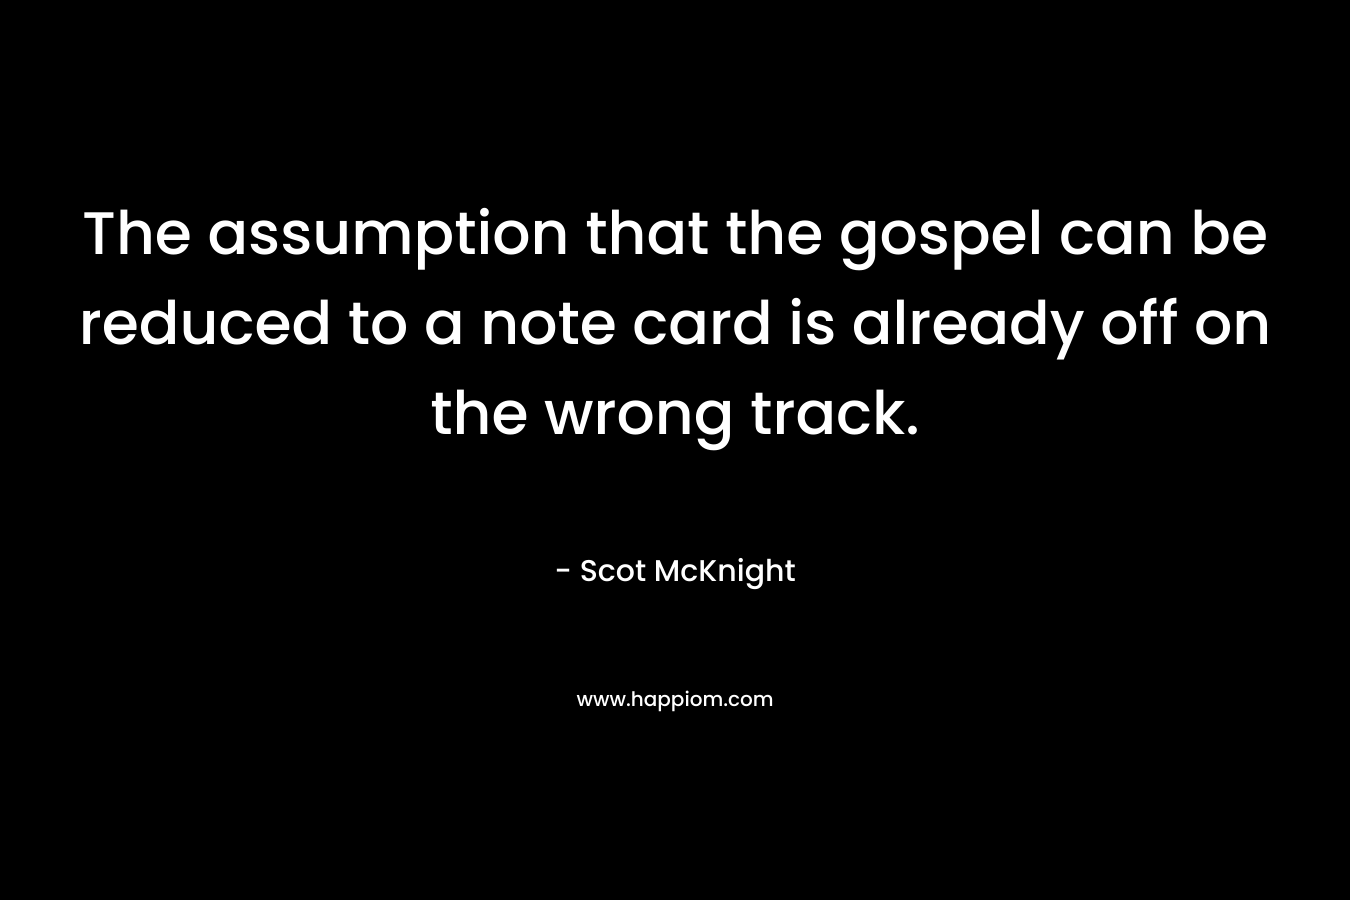 The assumption that the gospel can be reduced to a note card is already off on the wrong track.